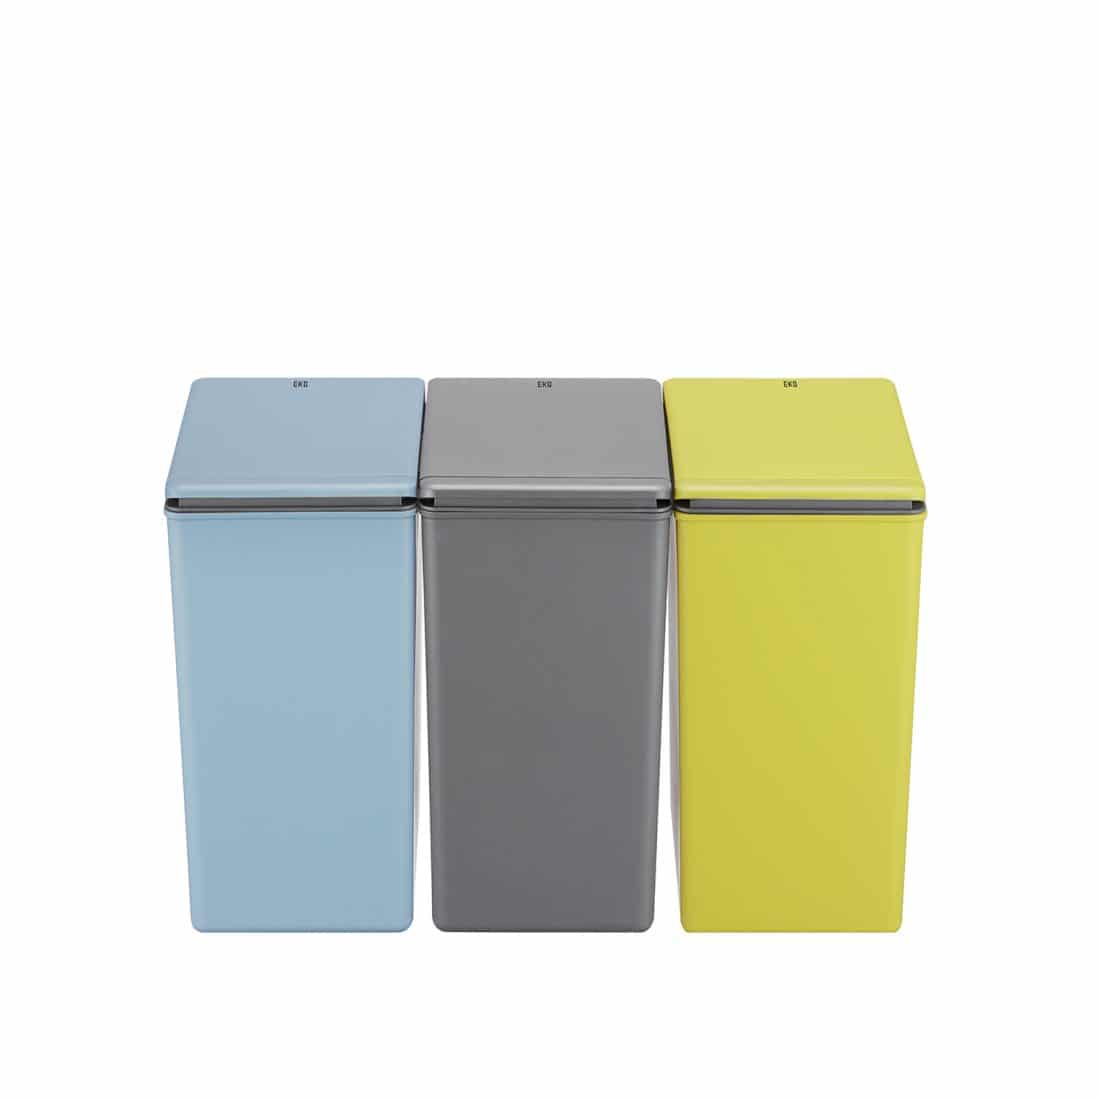 Morandi Touch Bin 20L Separate waste bin, connectable for recycling